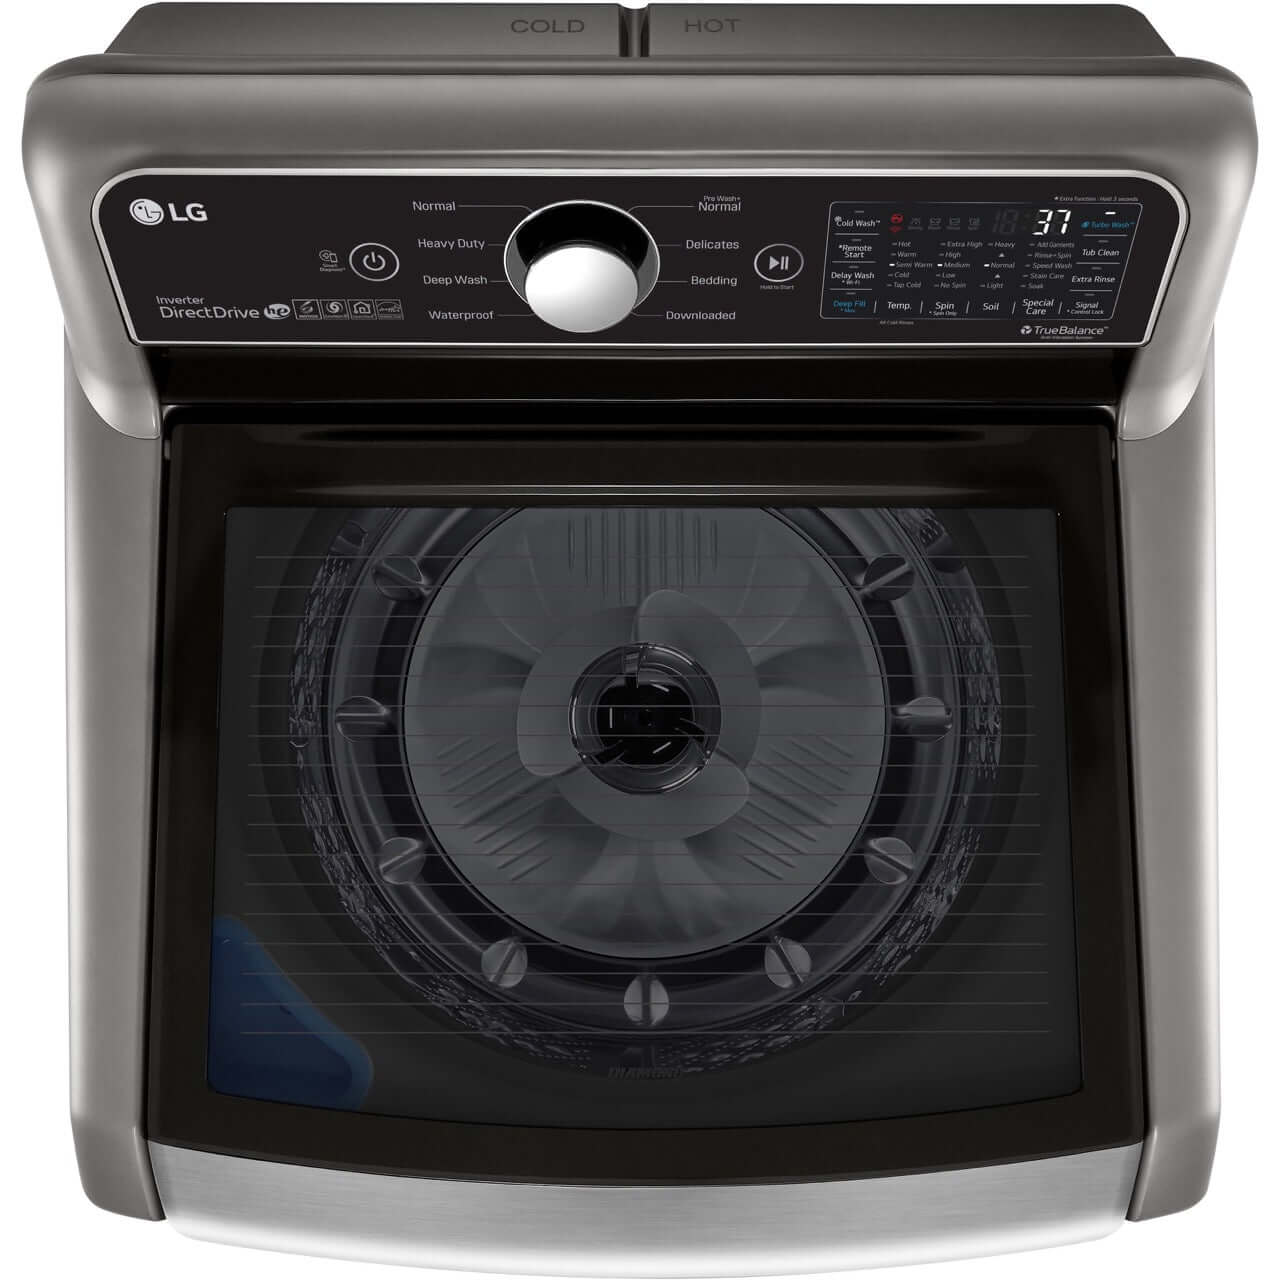 LG 27 In. 4.8 cu.ft. Top Load Washer with Agitator and TurboWash3D Technology in Graphite Steel (WT7305CV)